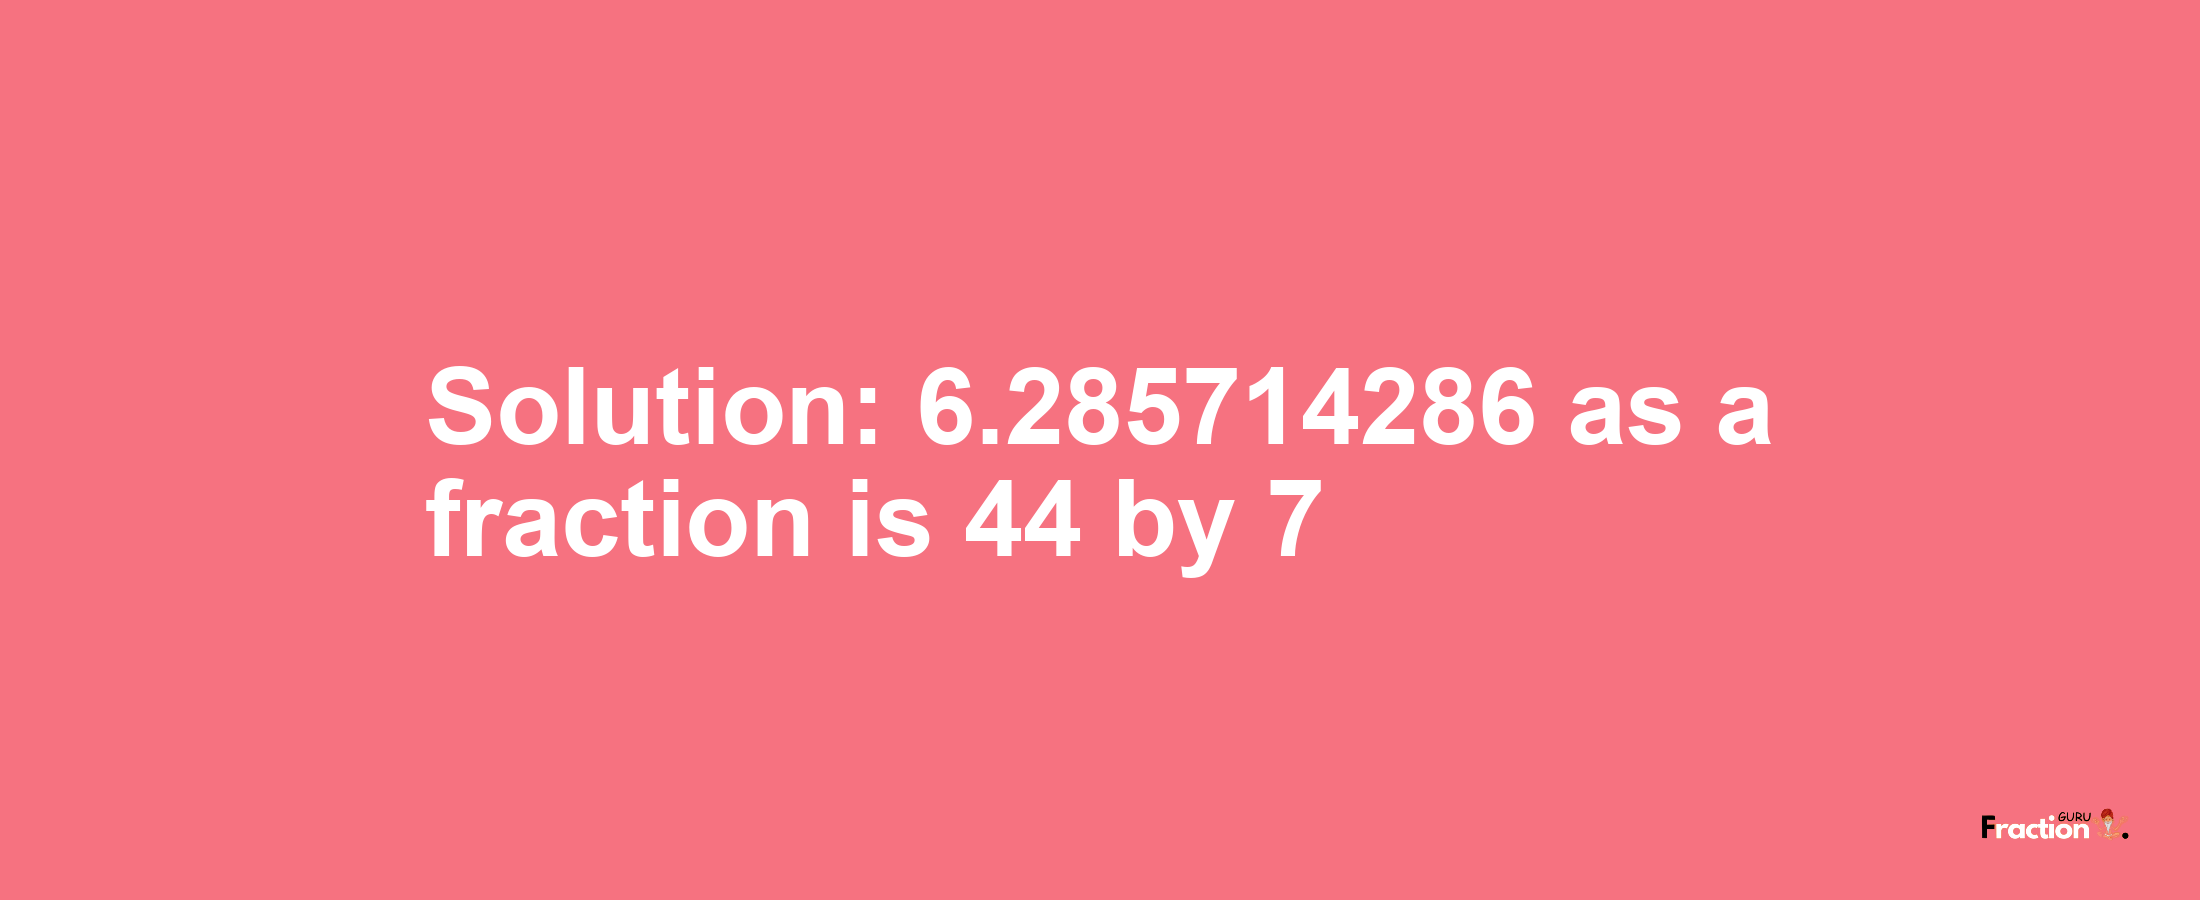 Solution:6.285714286 as a fraction is 44/7